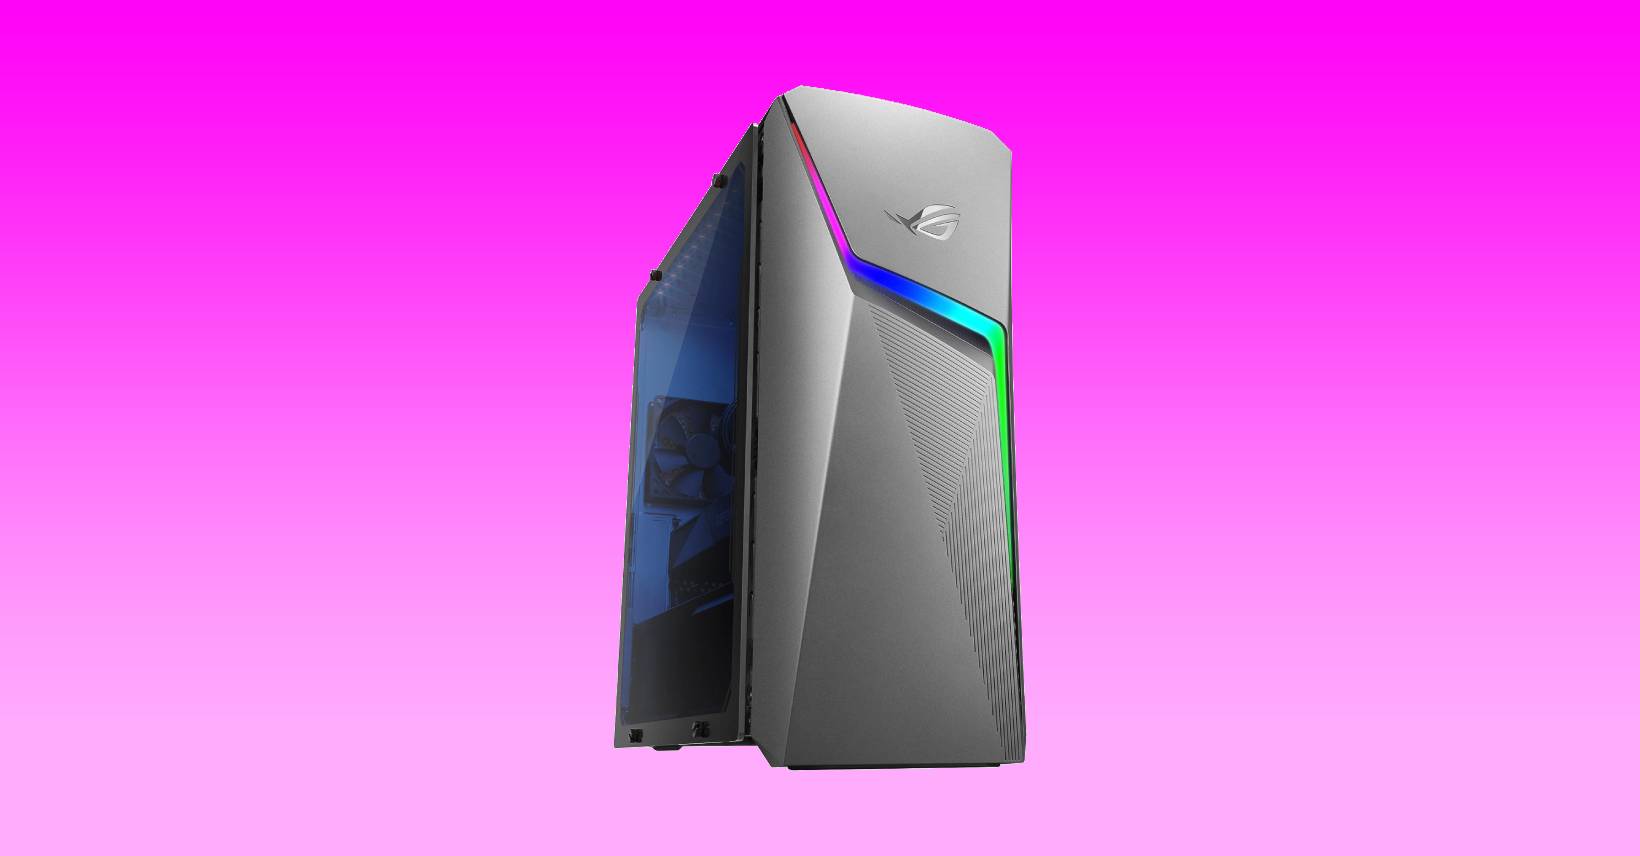 Powerhouse ASUS Strix G10 Gaming PC receives $364 price slash with Amazon deal